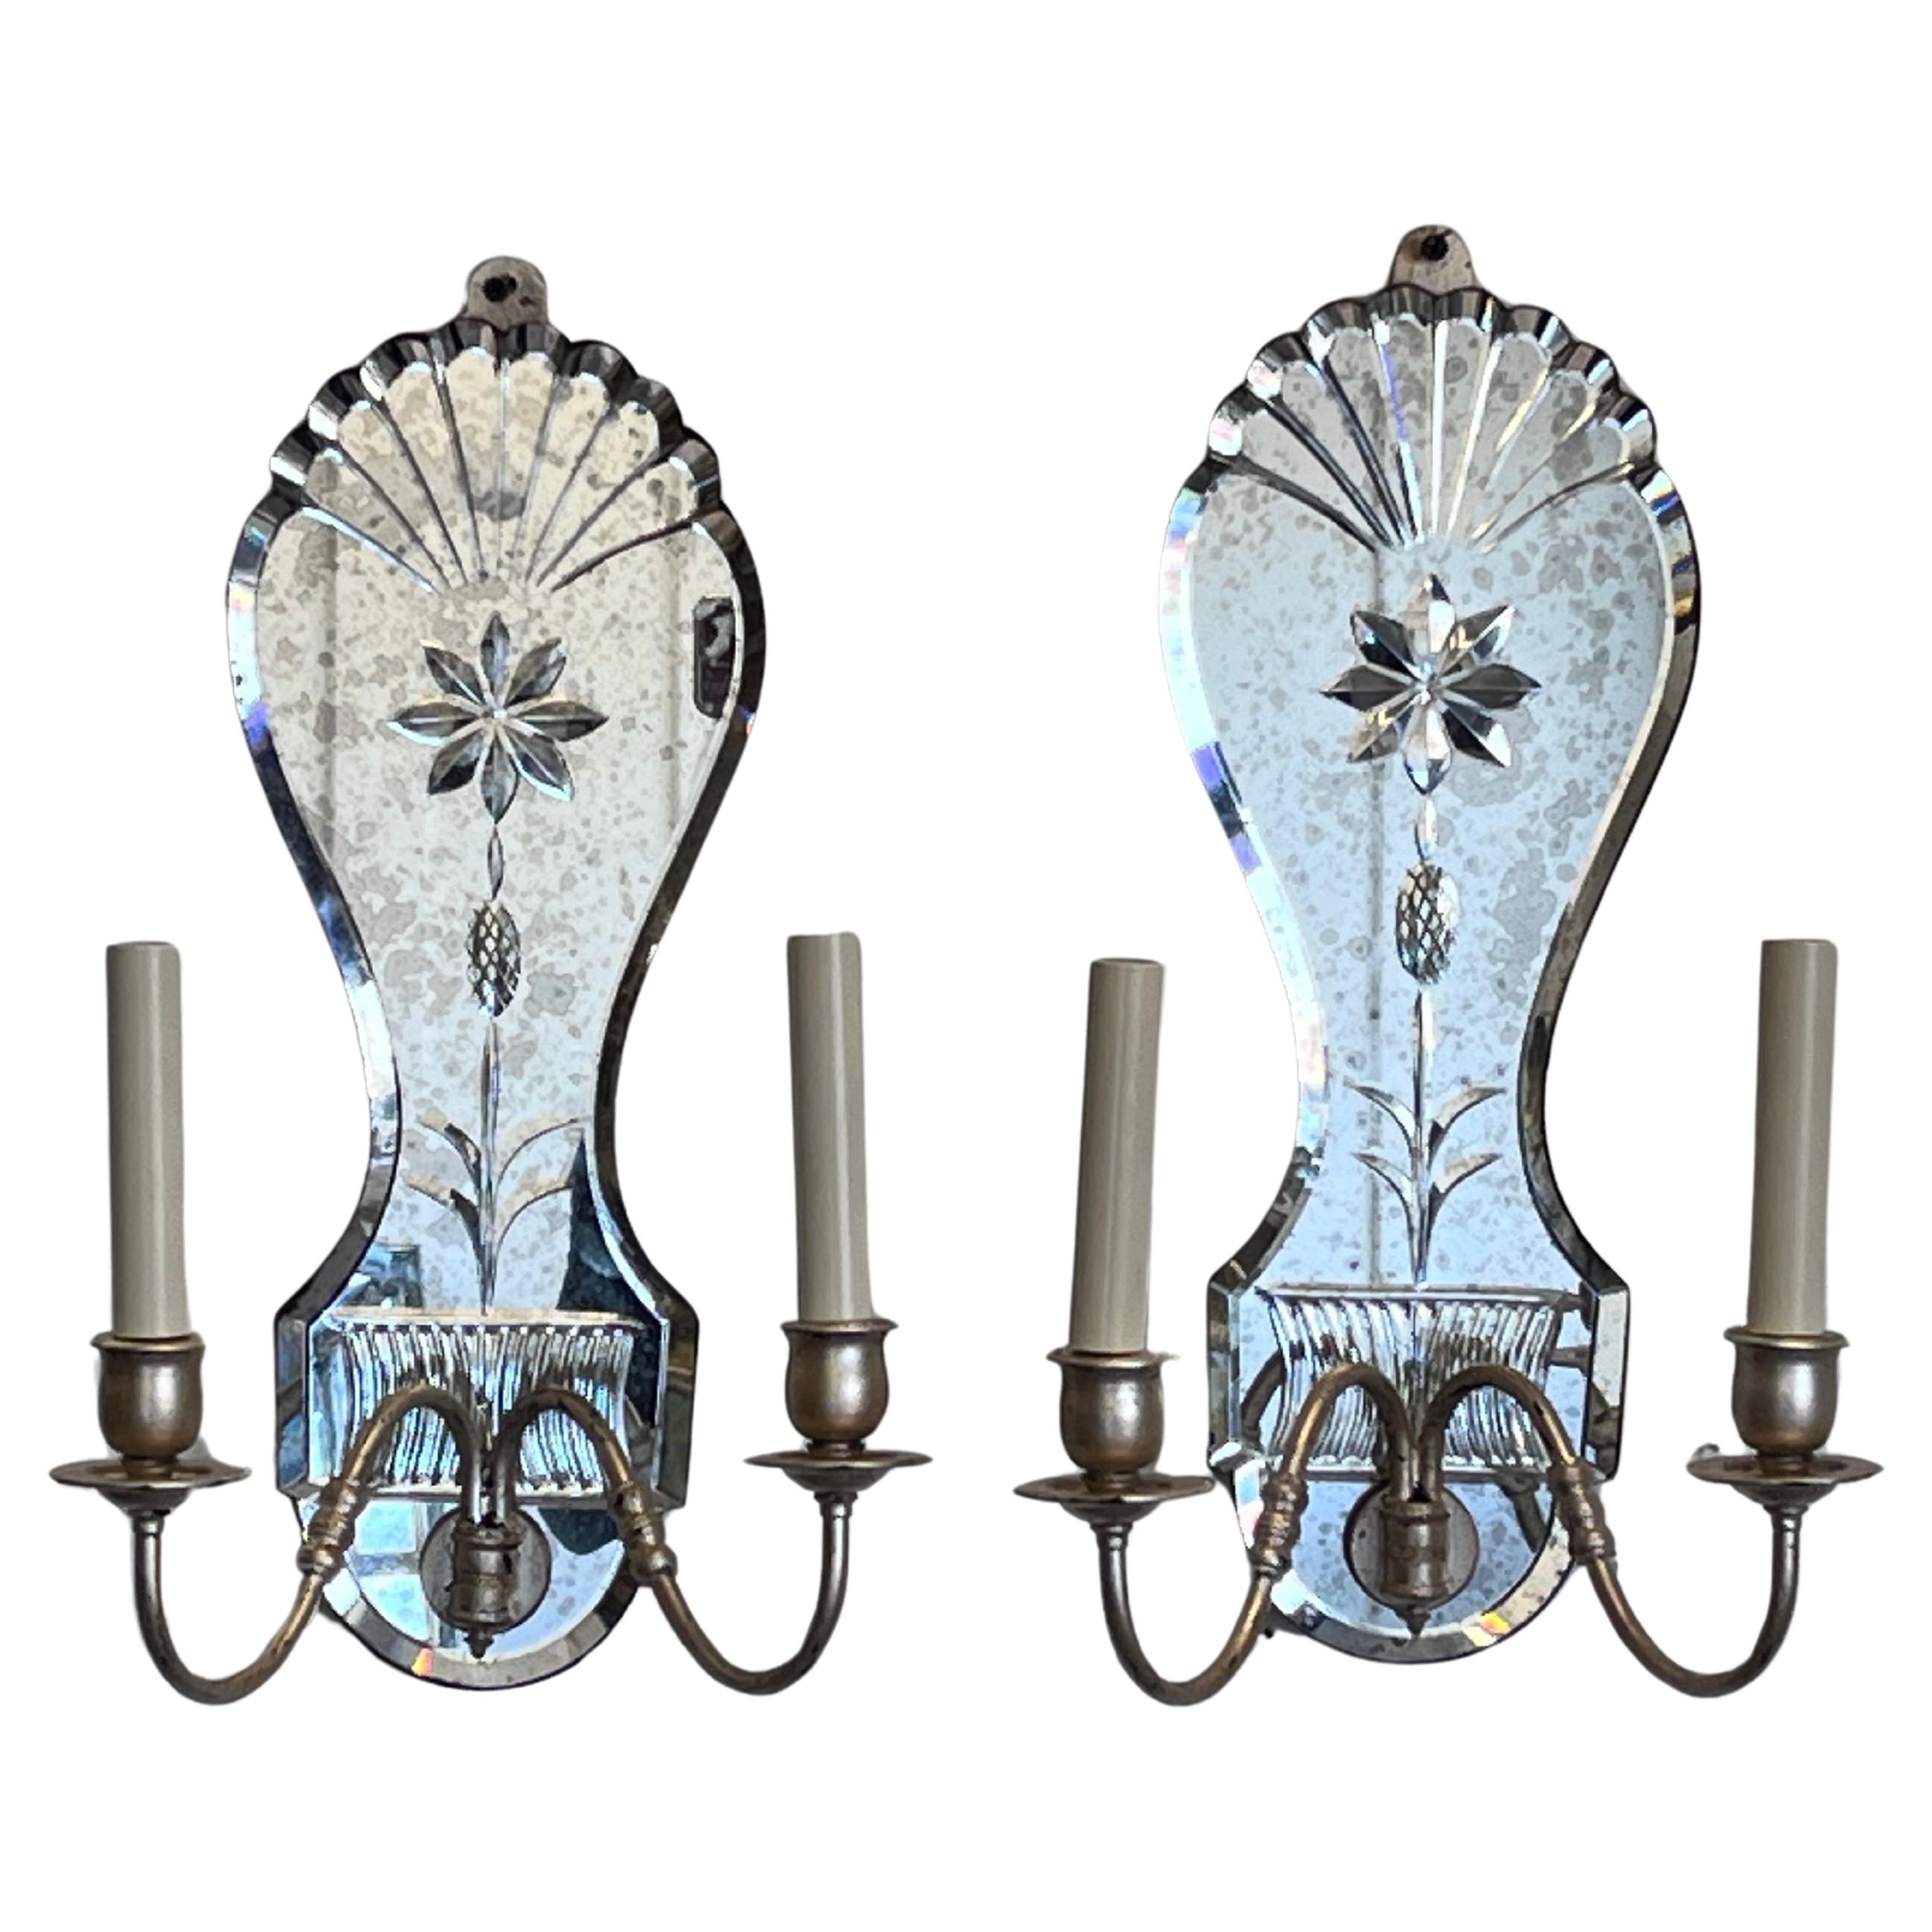 Pair of Antiqued Ornately Cut Floral Mirror Silver Gilt Double Arm Wall Sconces